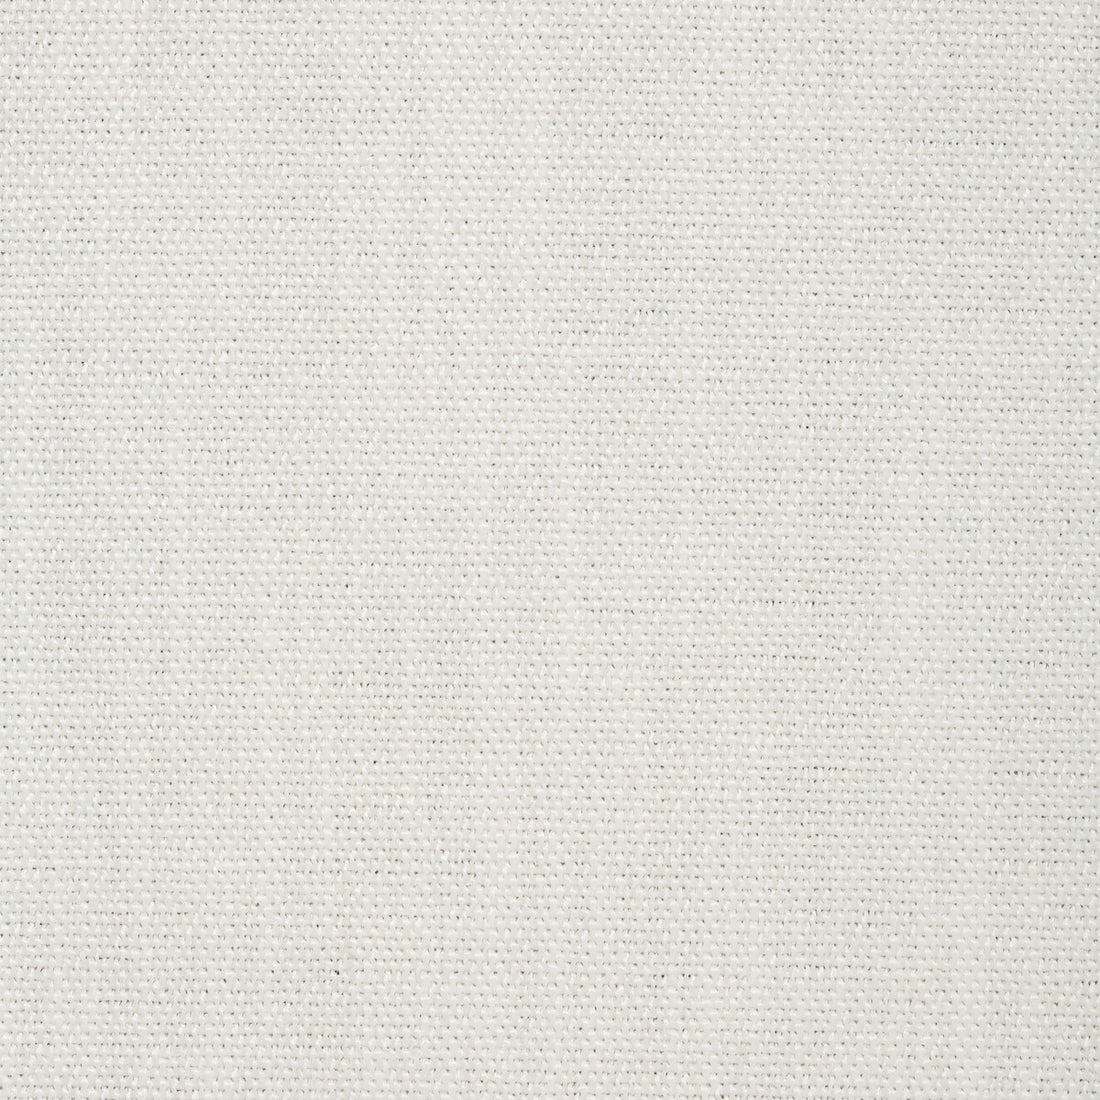 Kravet Smart fabric in 35113-101 color - pattern 35113.101.0 - by Kravet Smart in the Performance Crypton Home collection